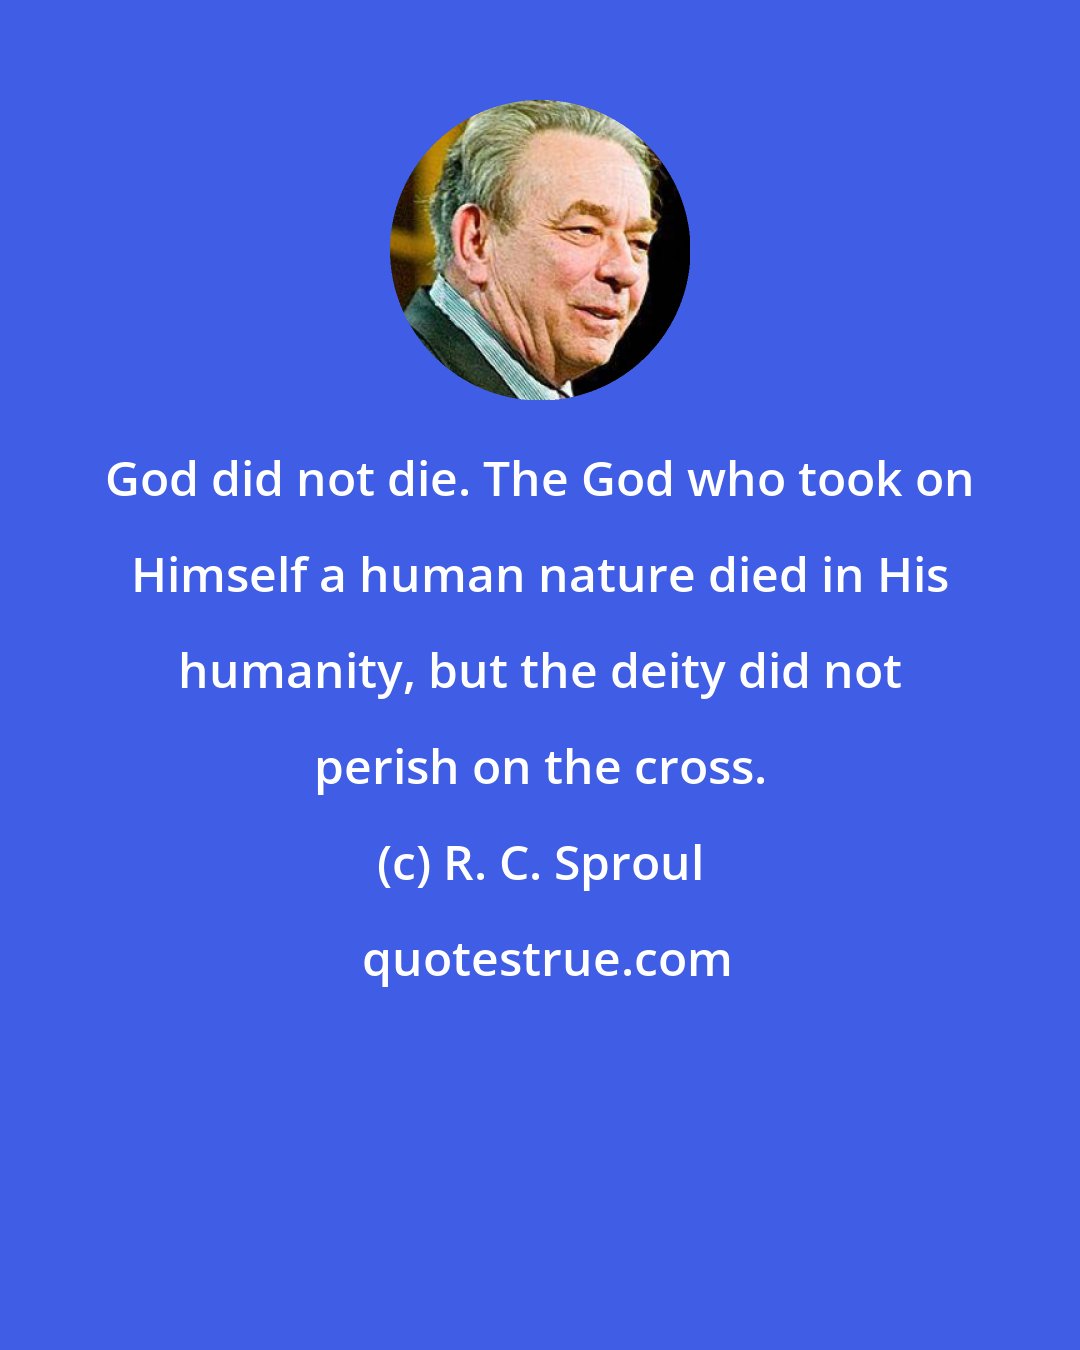 R. C. Sproul: God did not die. The God who took on Himself a human nature died in His humanity, but the deity did not perish on the cross.